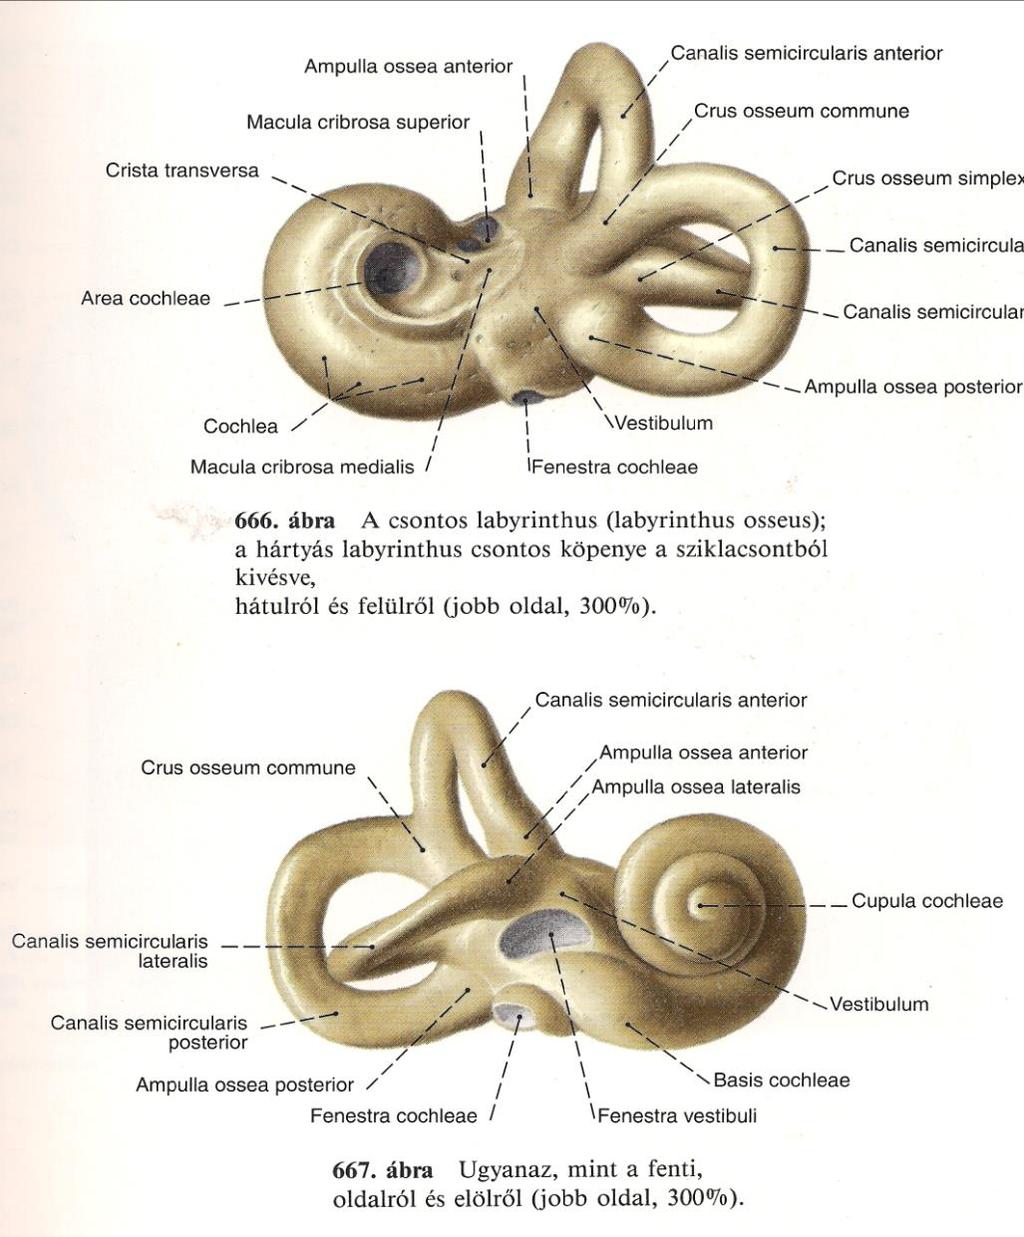 Cochlea 3 mm in diameter similar to snail shell Basis 2 and ¾ turning Basis It